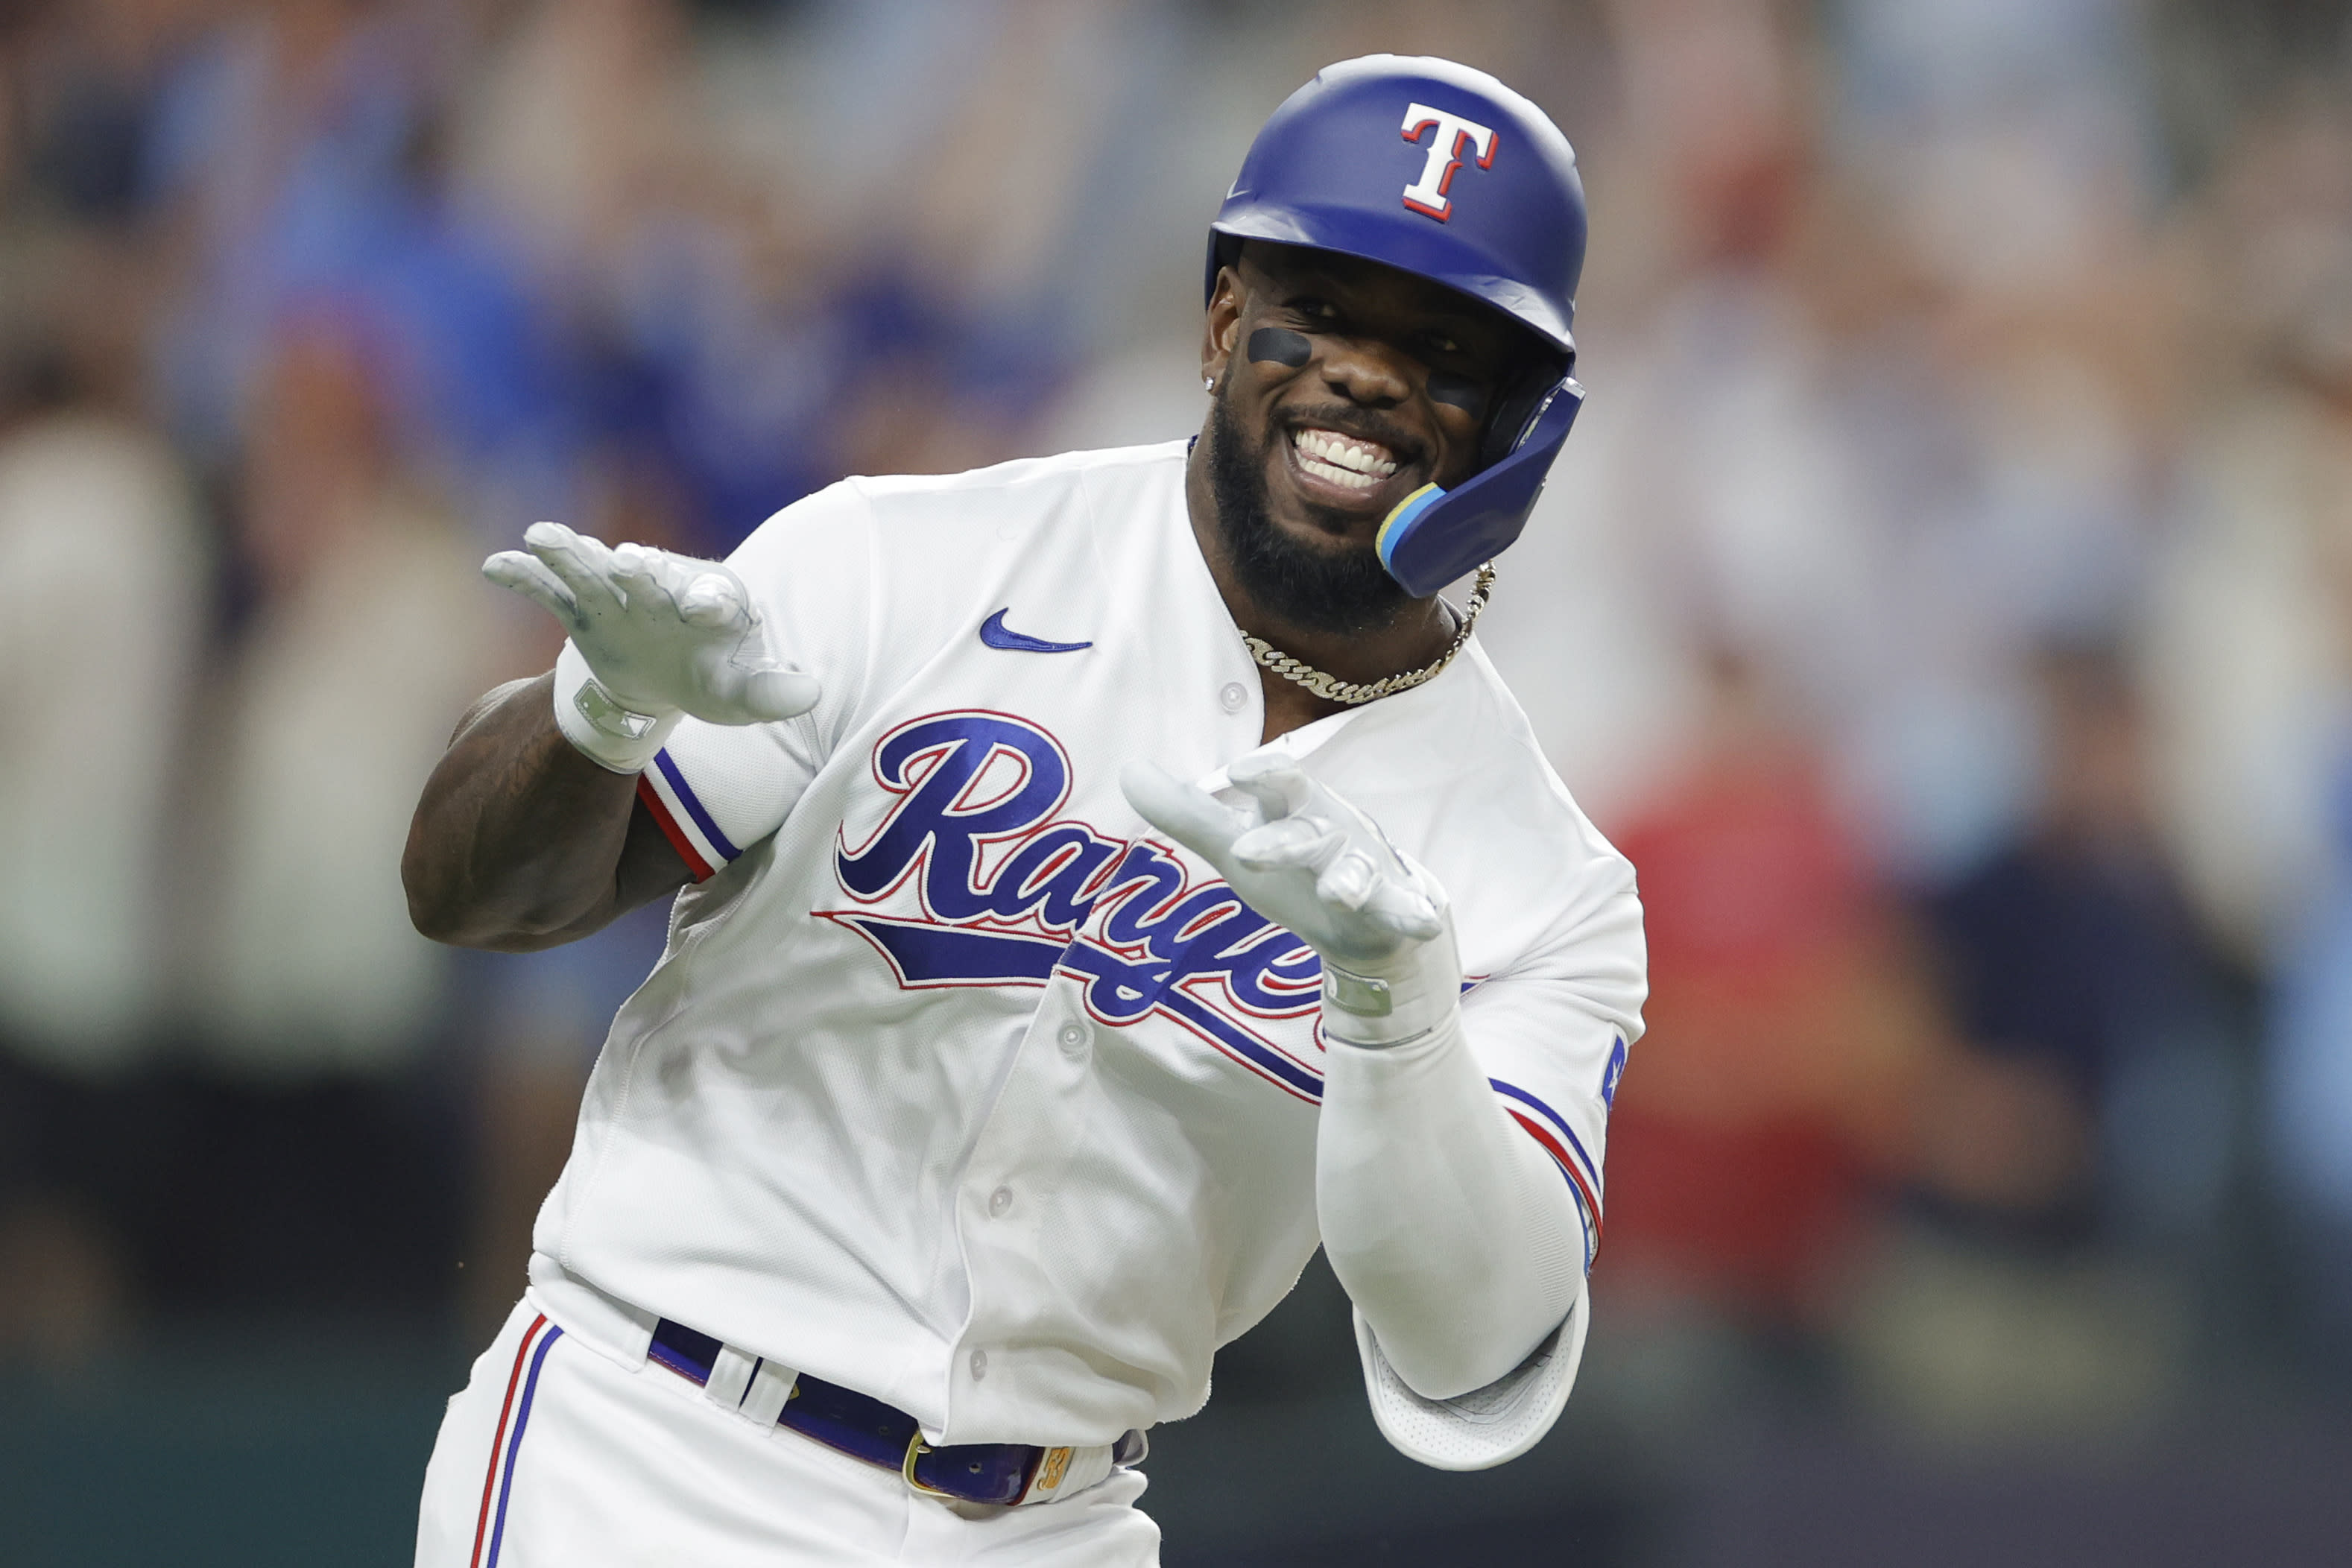 MLB playoffs ALDS Game 3: Rangers complete sweep to eliminate Orioles,  Astros within one win of ALCS